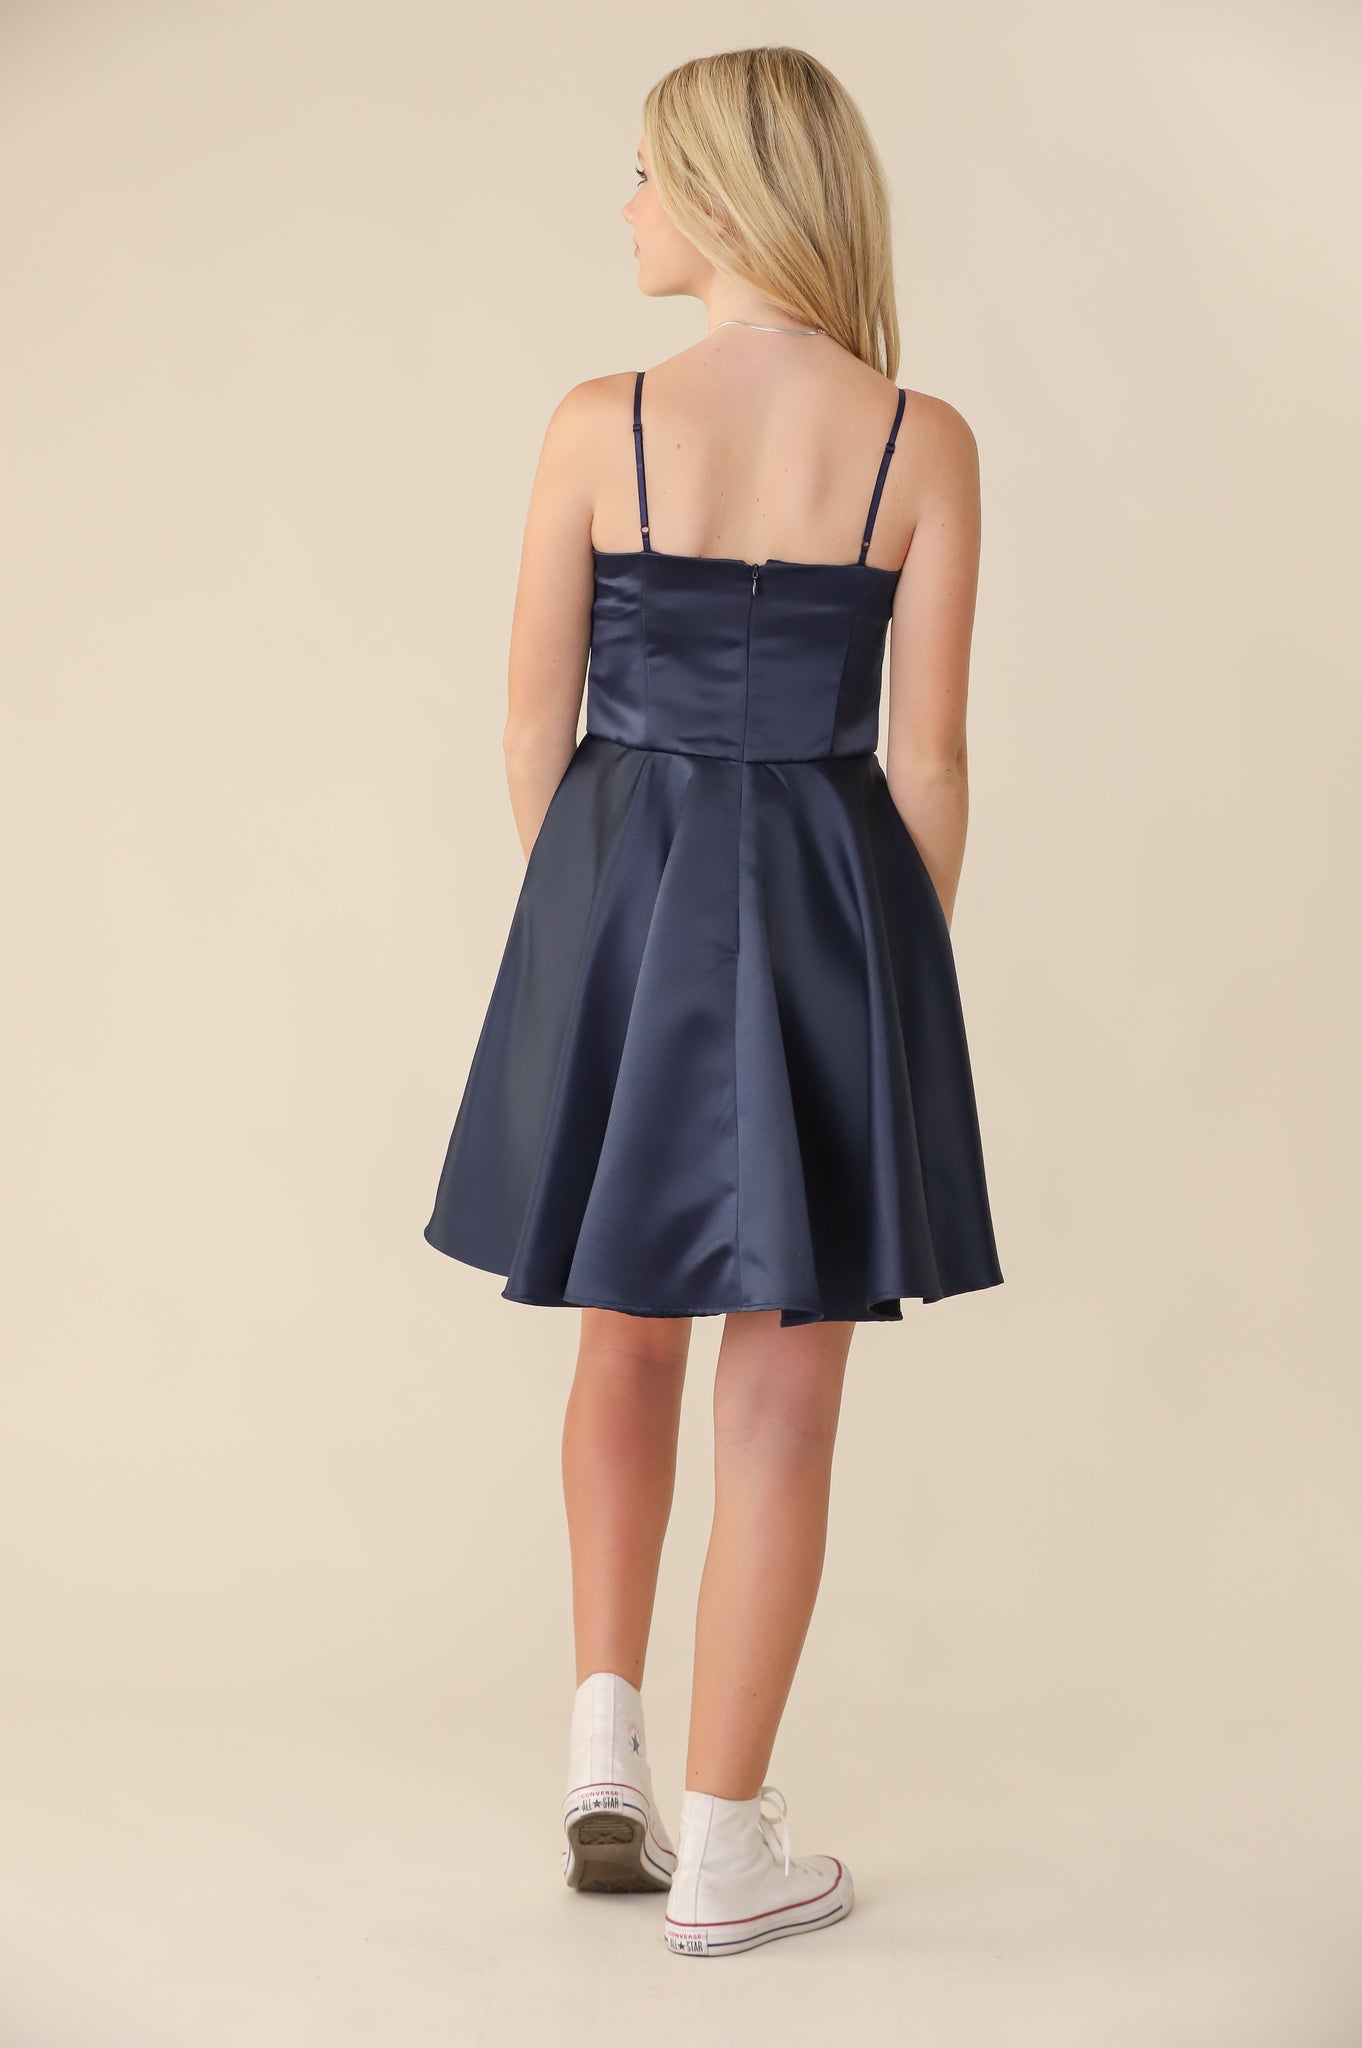 Fit and Flare Navy Satin Party Dress in Longer Length